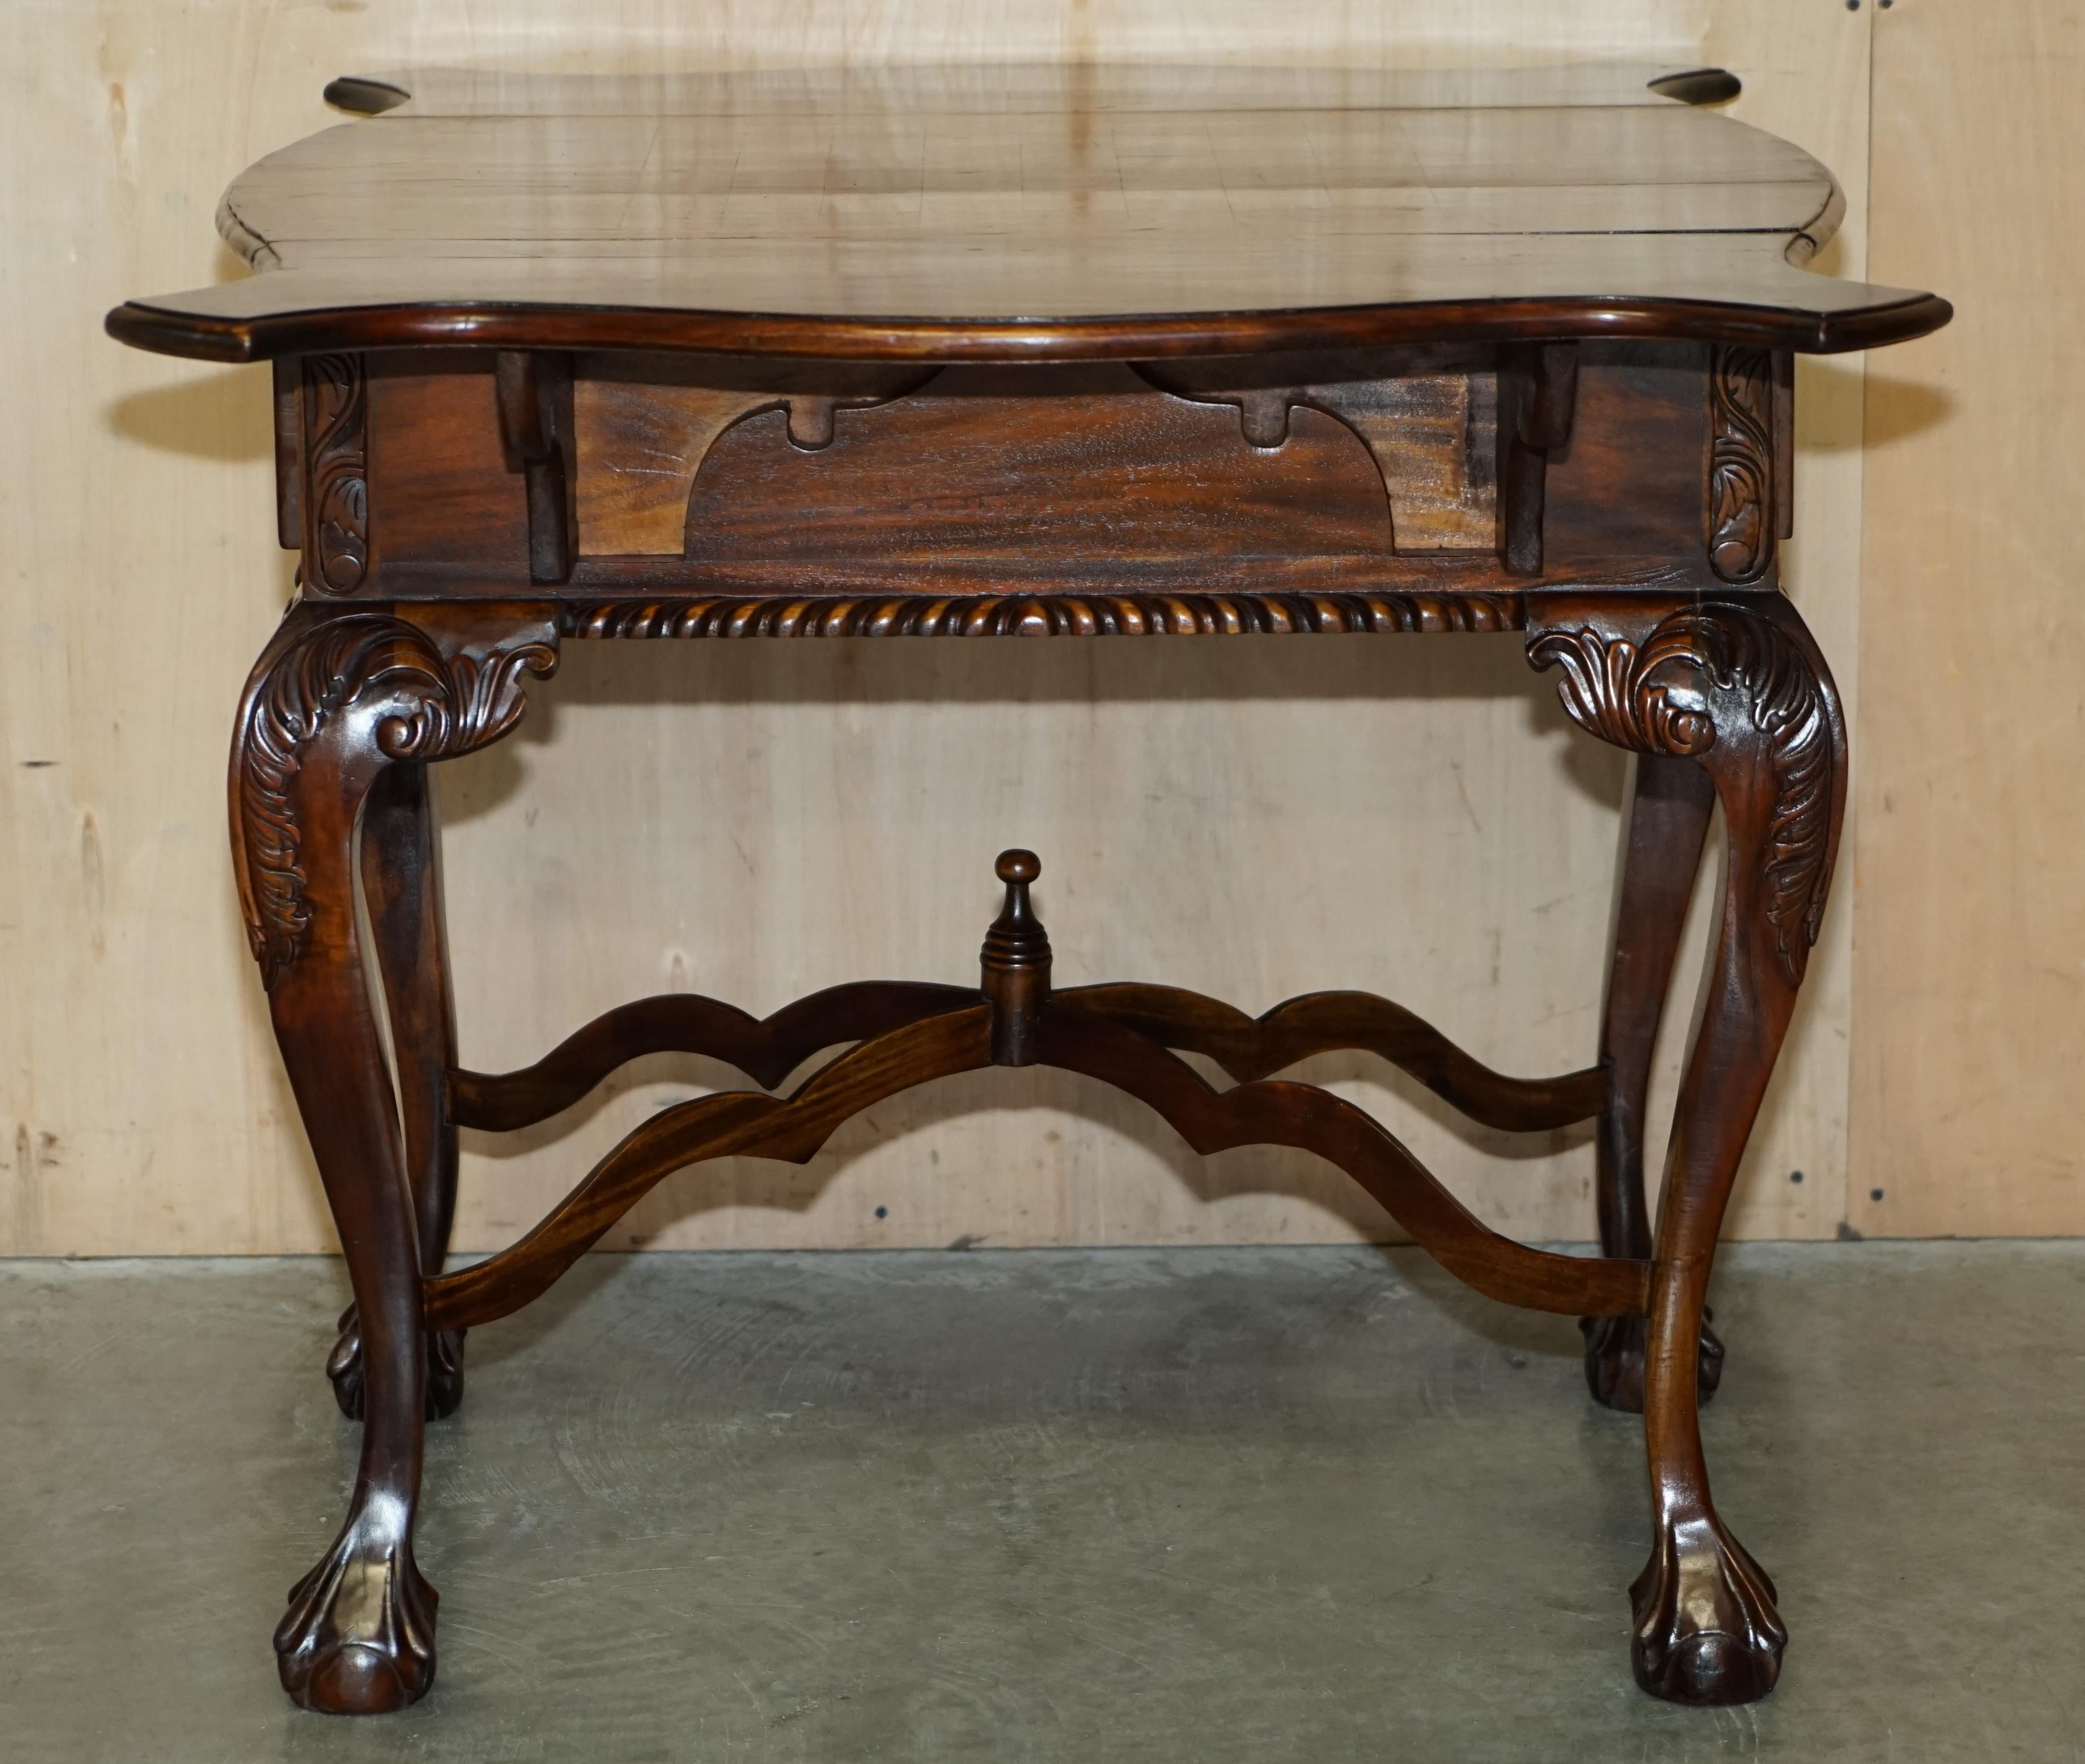 EXQUISITE TABLE DE CHESSAGE A PIEDS The Claw & Ball EXTENDiNG CHESS BOARD STYLE Thomas Chippendale en vente 7